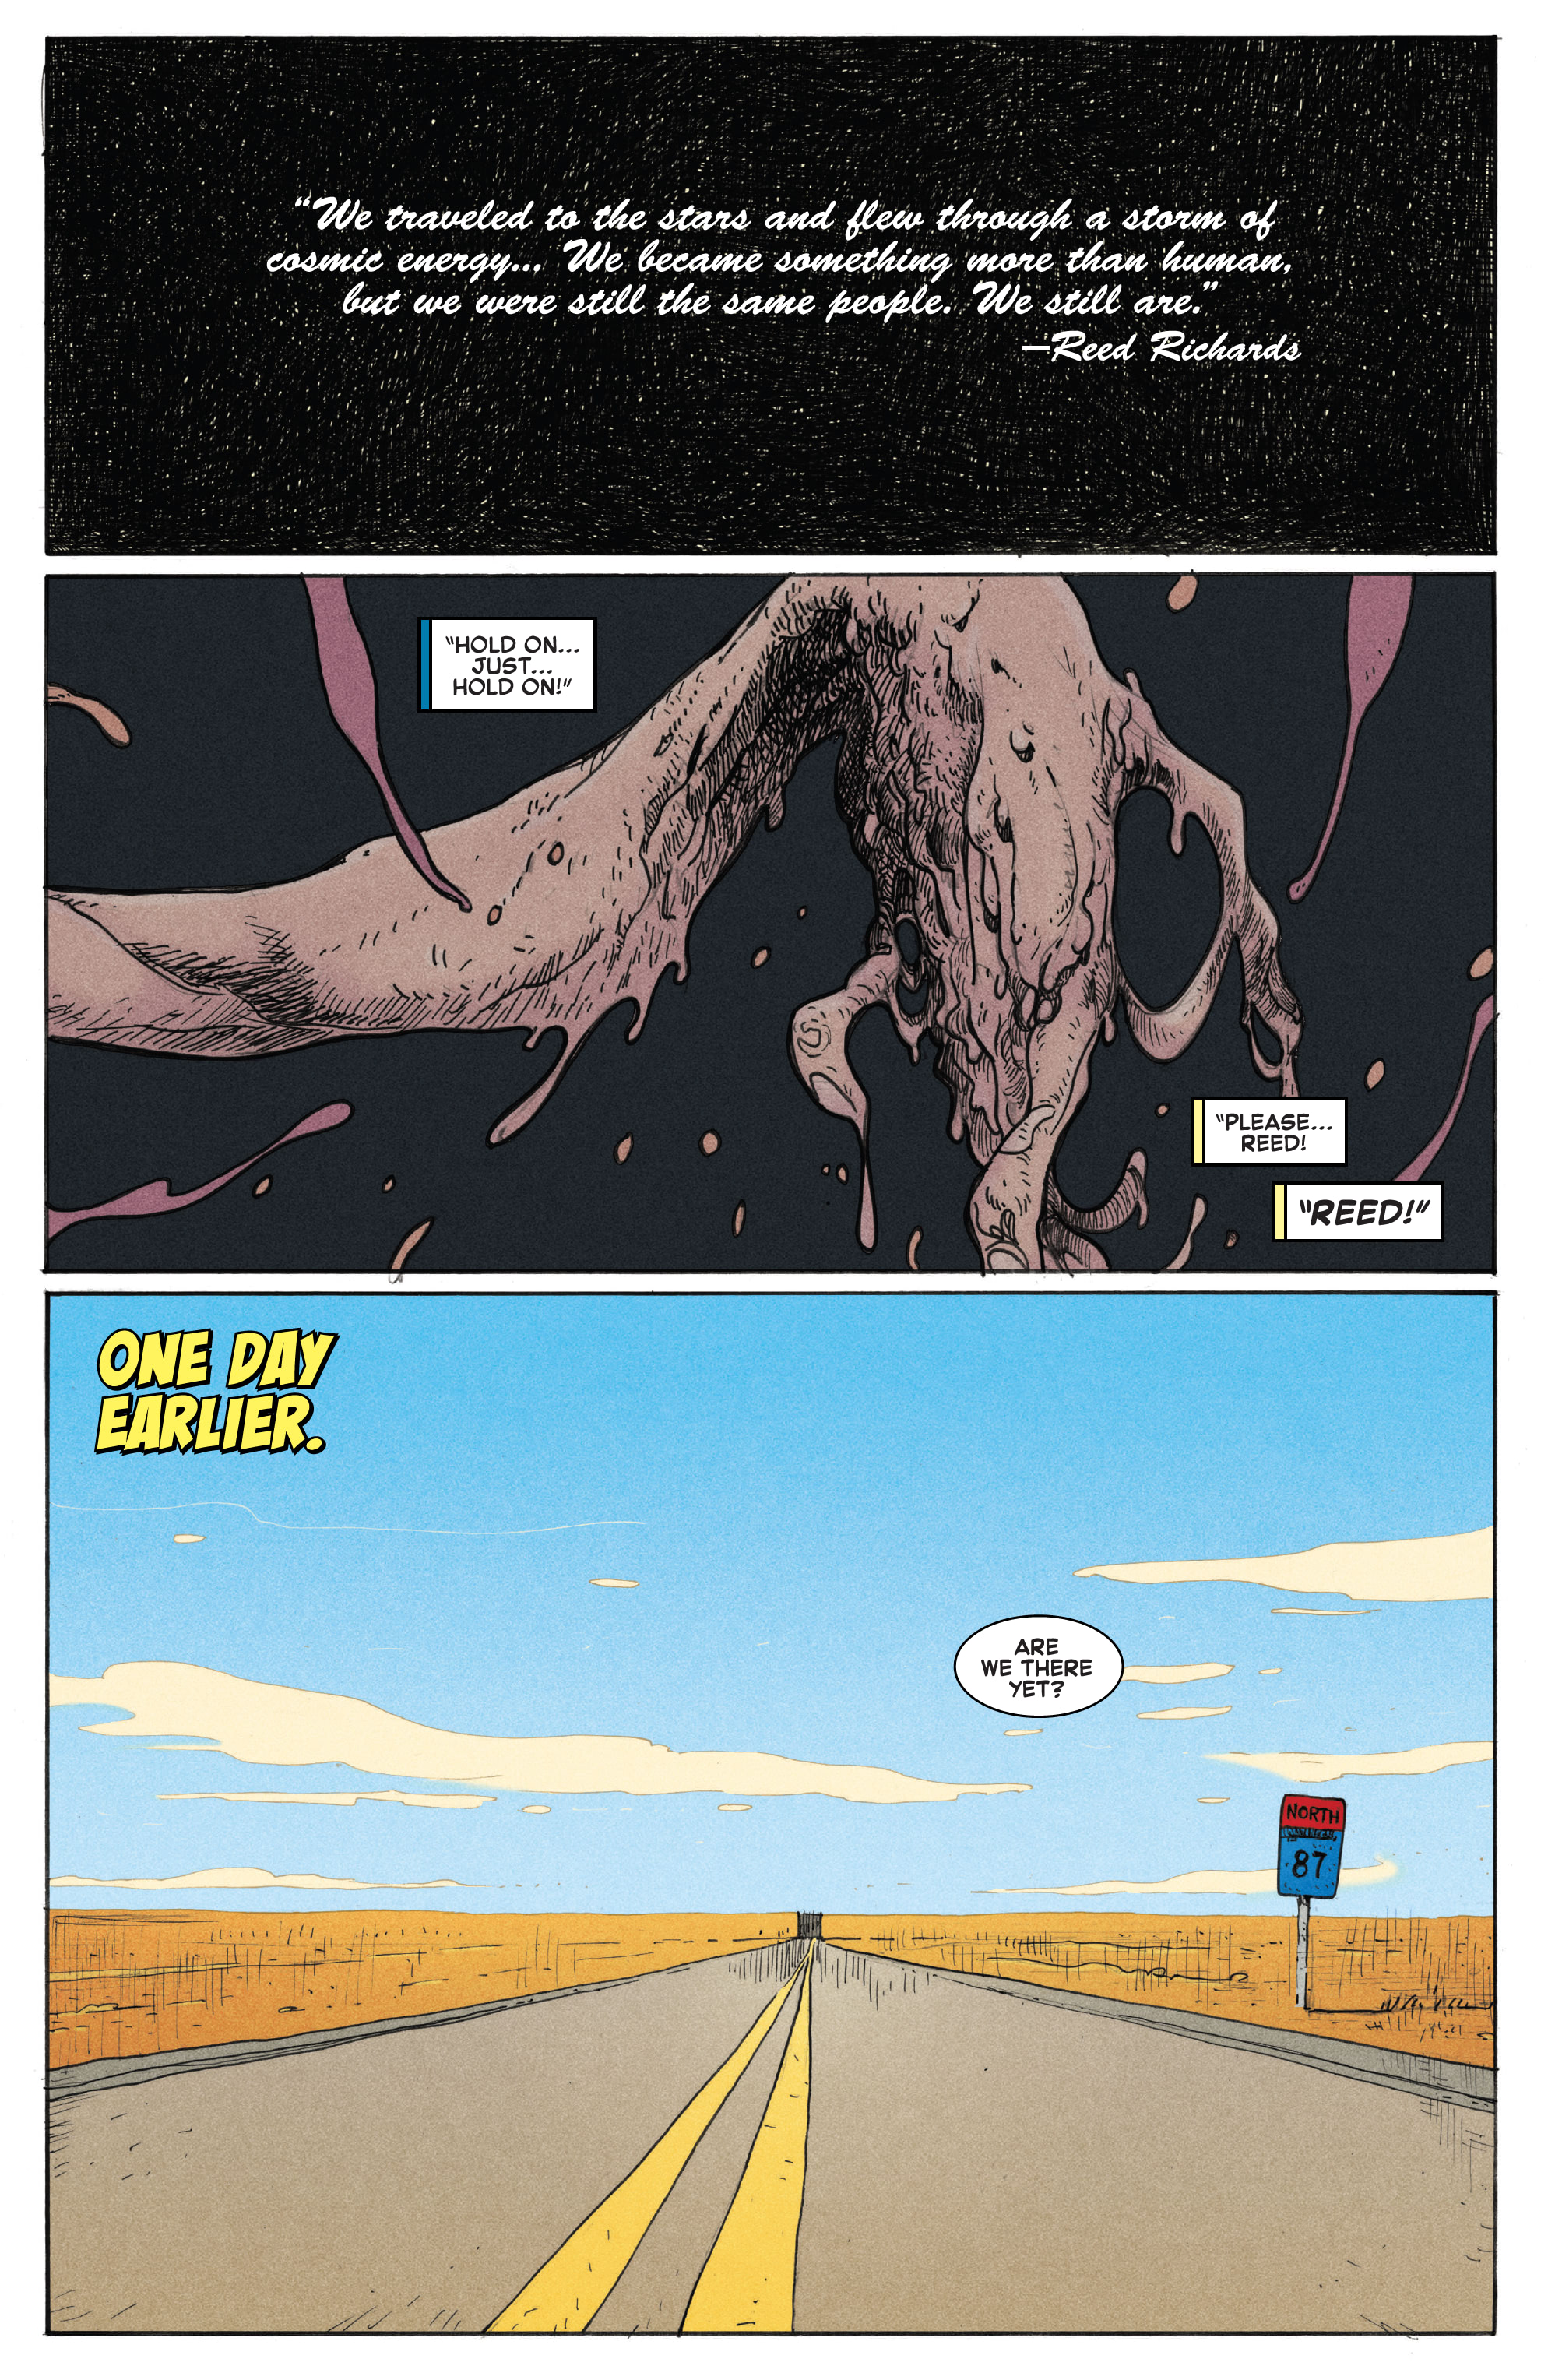 Fantastic Four: Road Trip (2020): Chapter 1 - Page 3